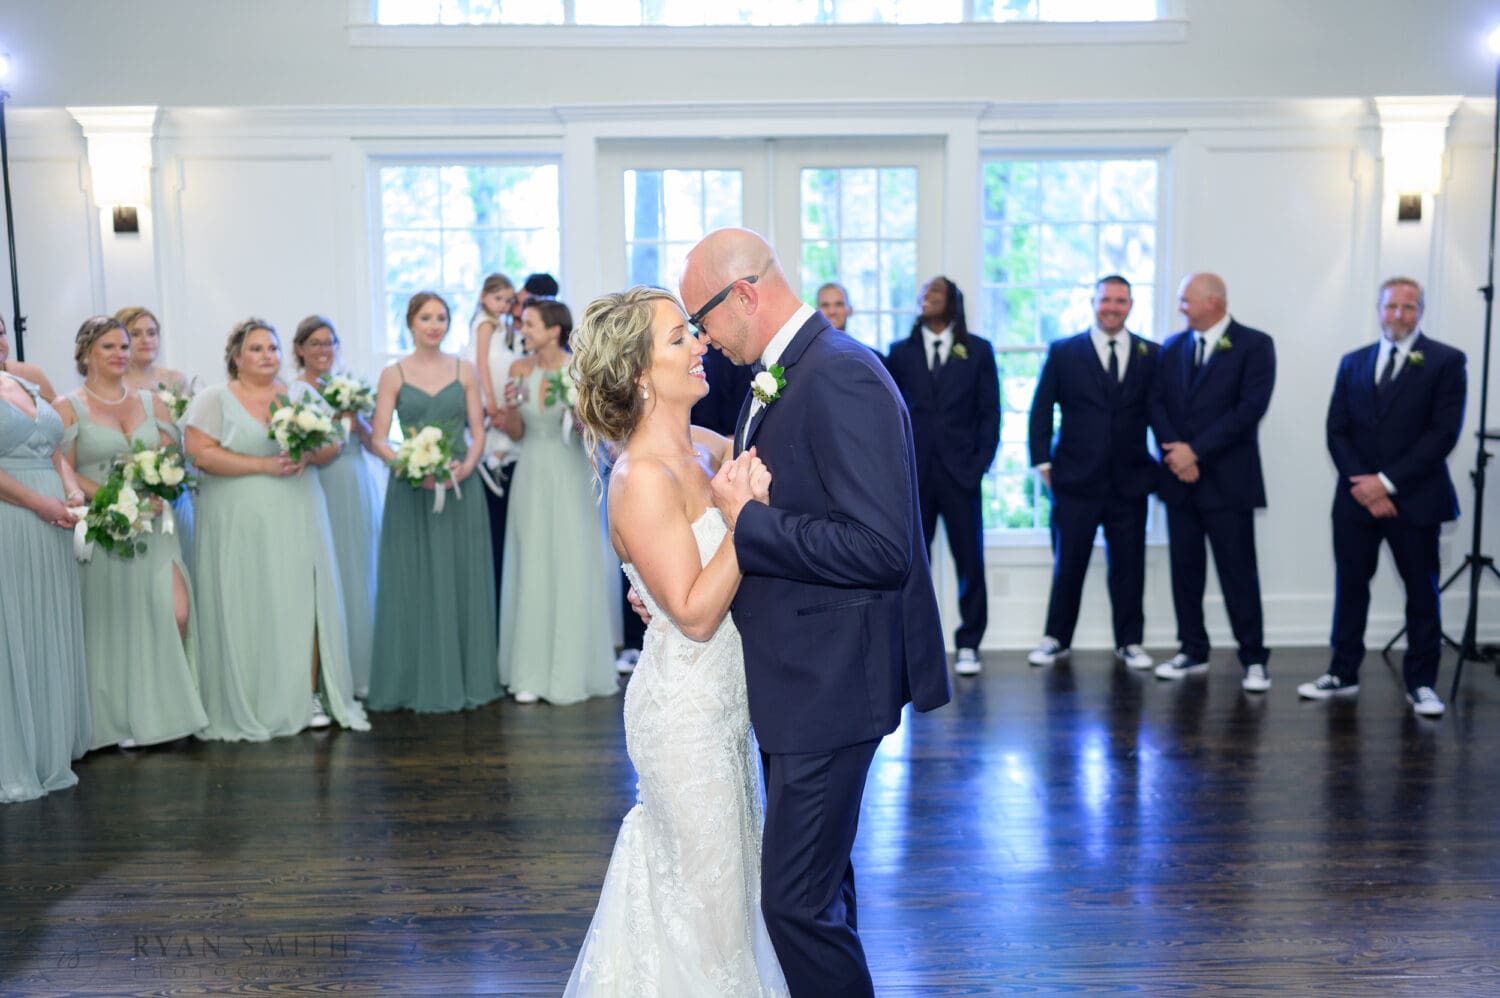 First dance with the bride and groom - The Village House at Litchfield